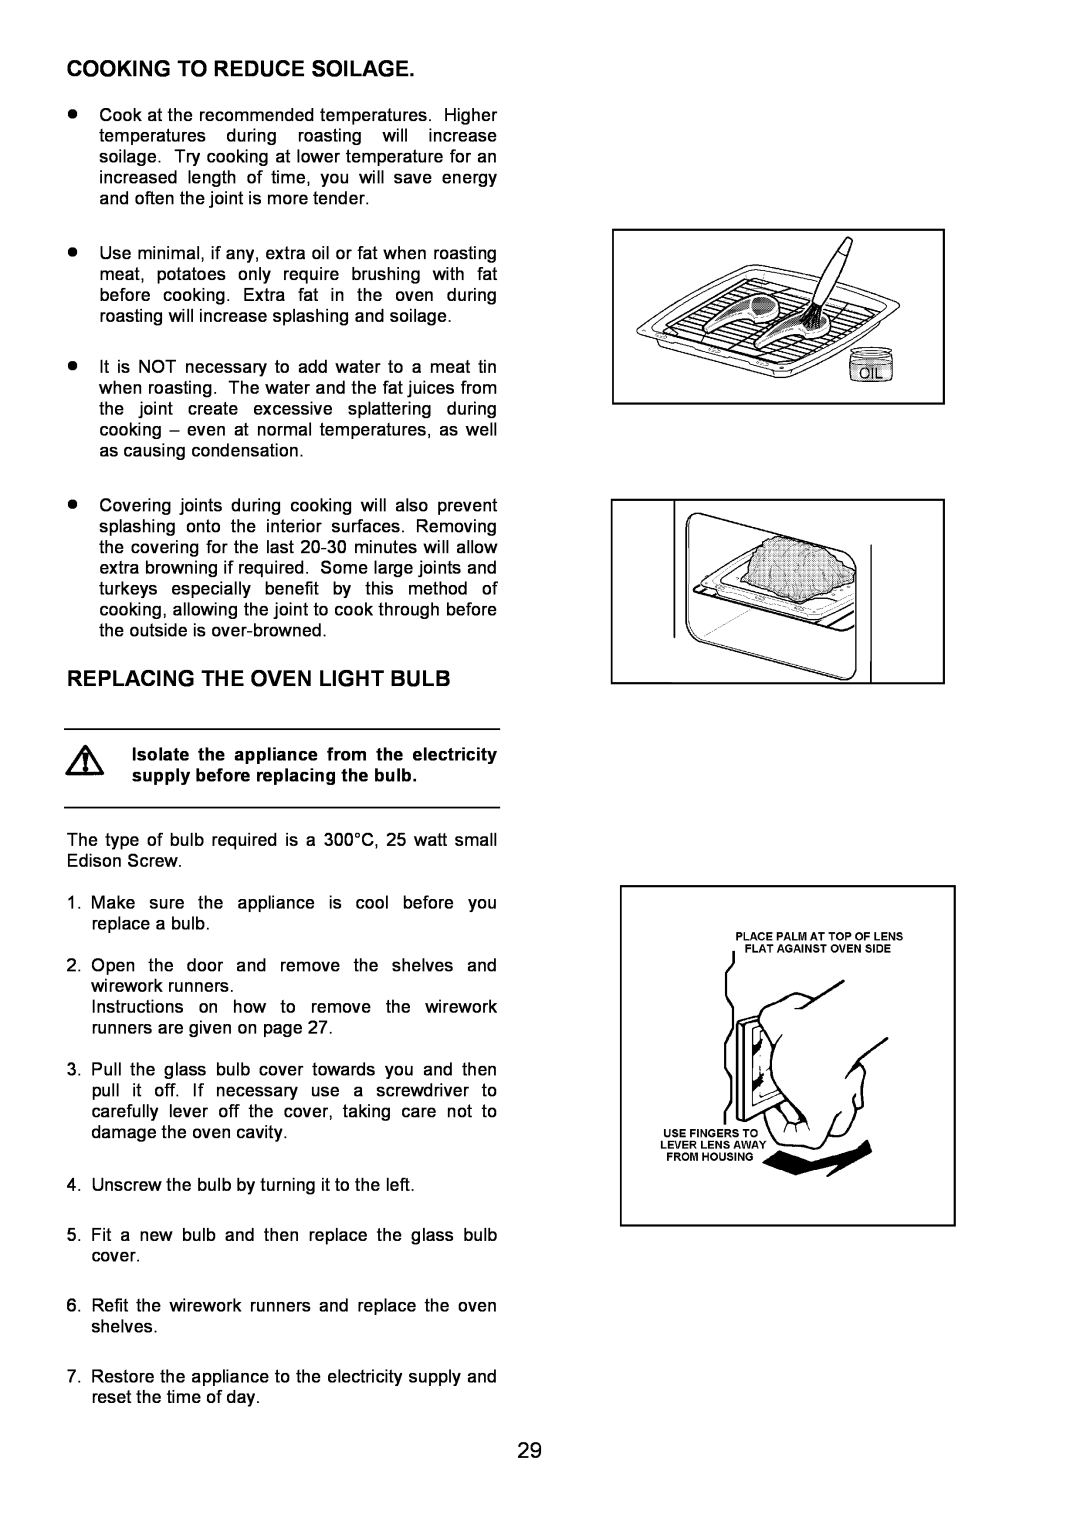 Zanussi ZHF865 manual Cooking To Reduce Soilage, Replacing The Oven Light Bulb 